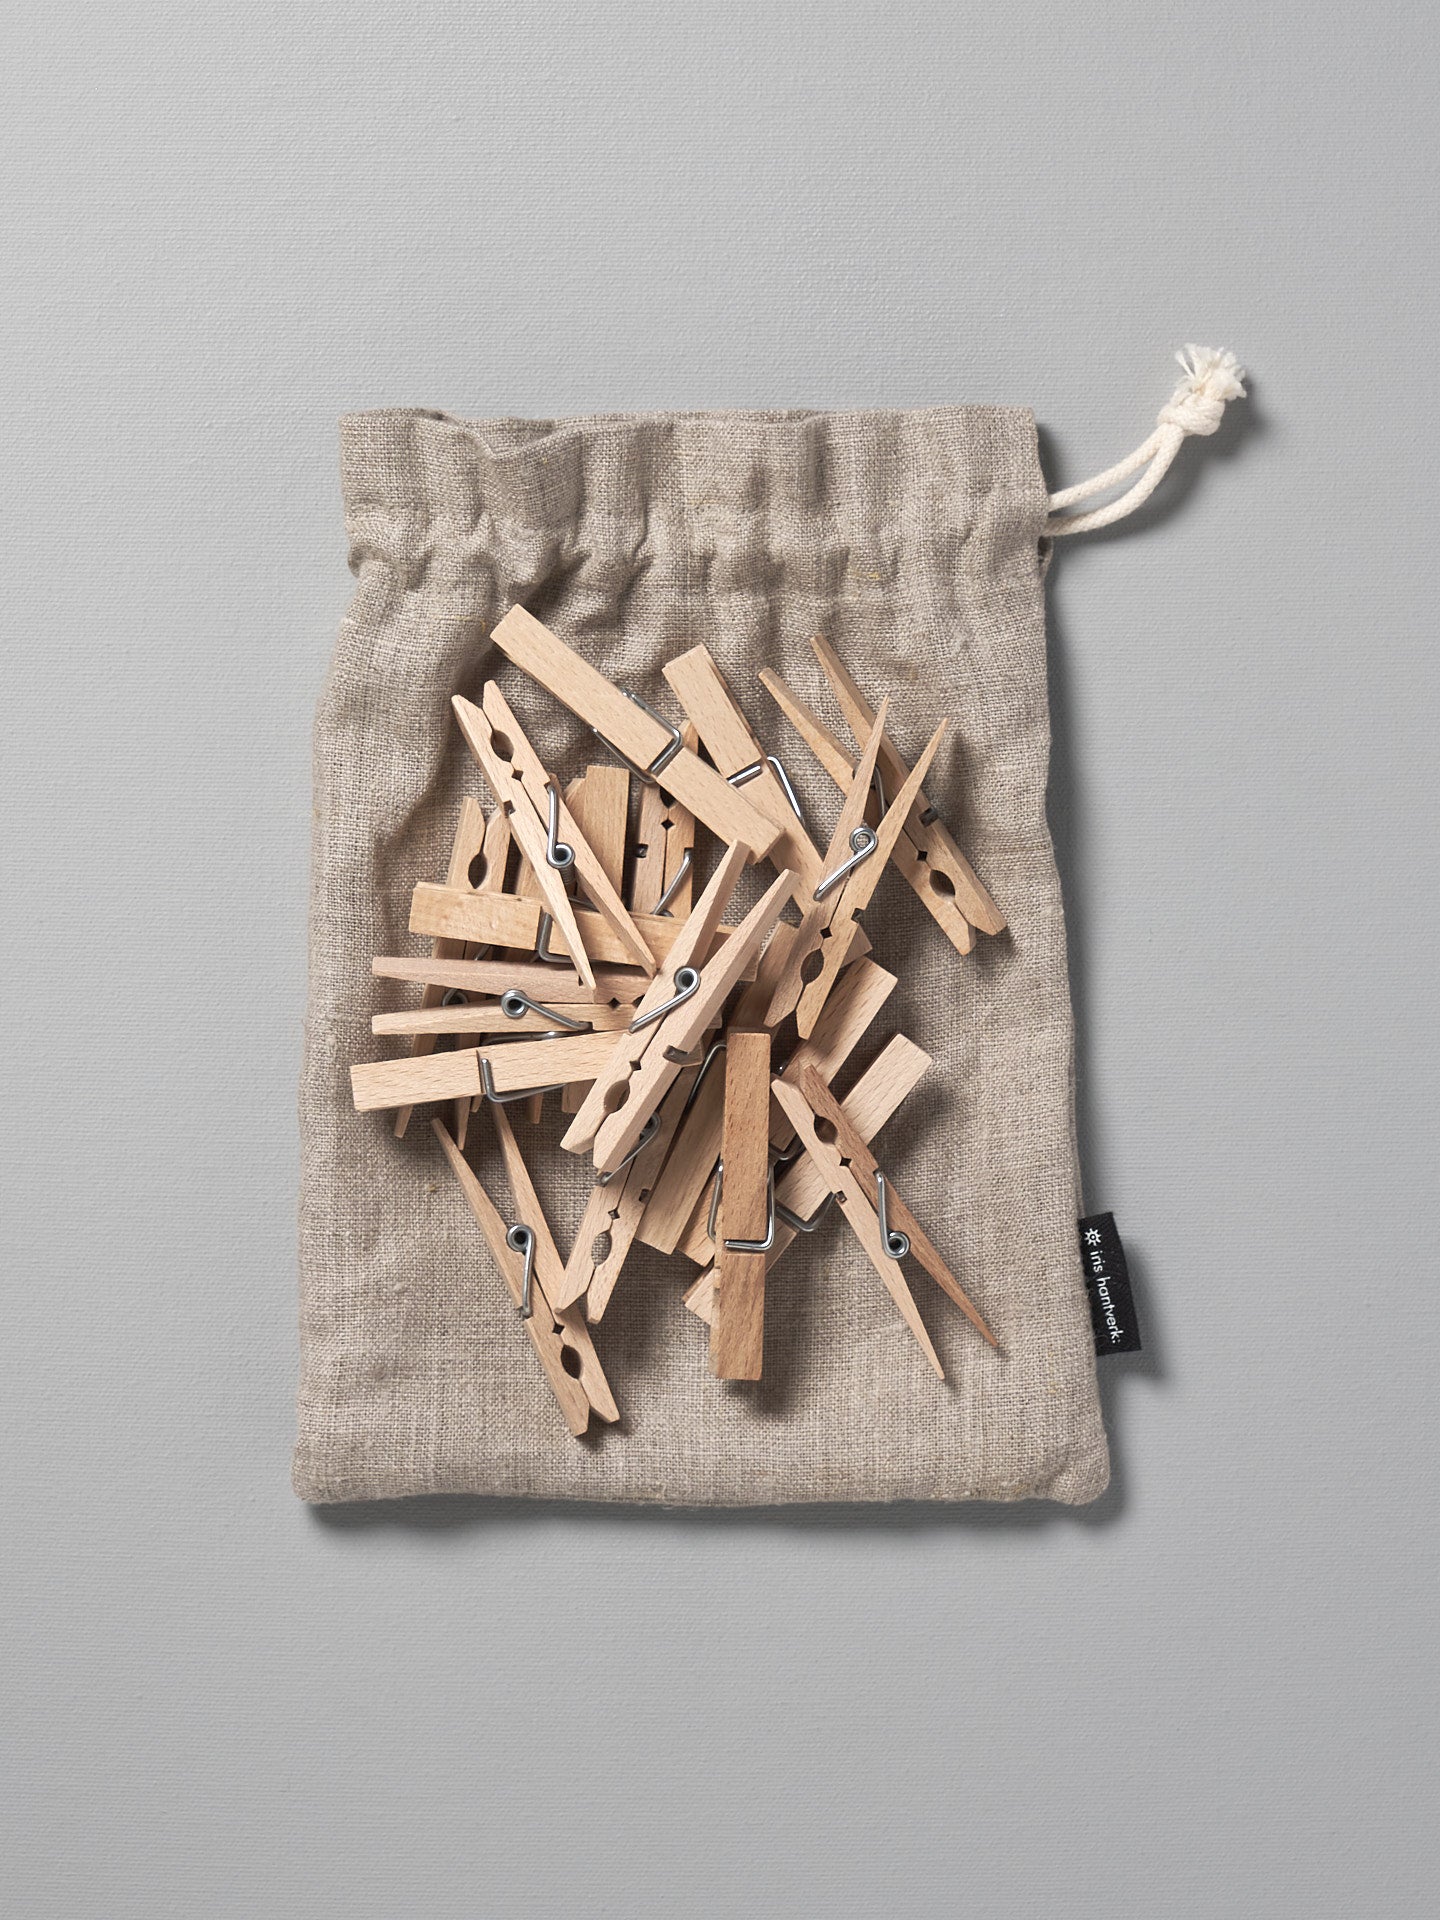 A collection of Iris Hantverk Clothes Pegs – 20pcs inside a drawstring bag lying on a gray surface.